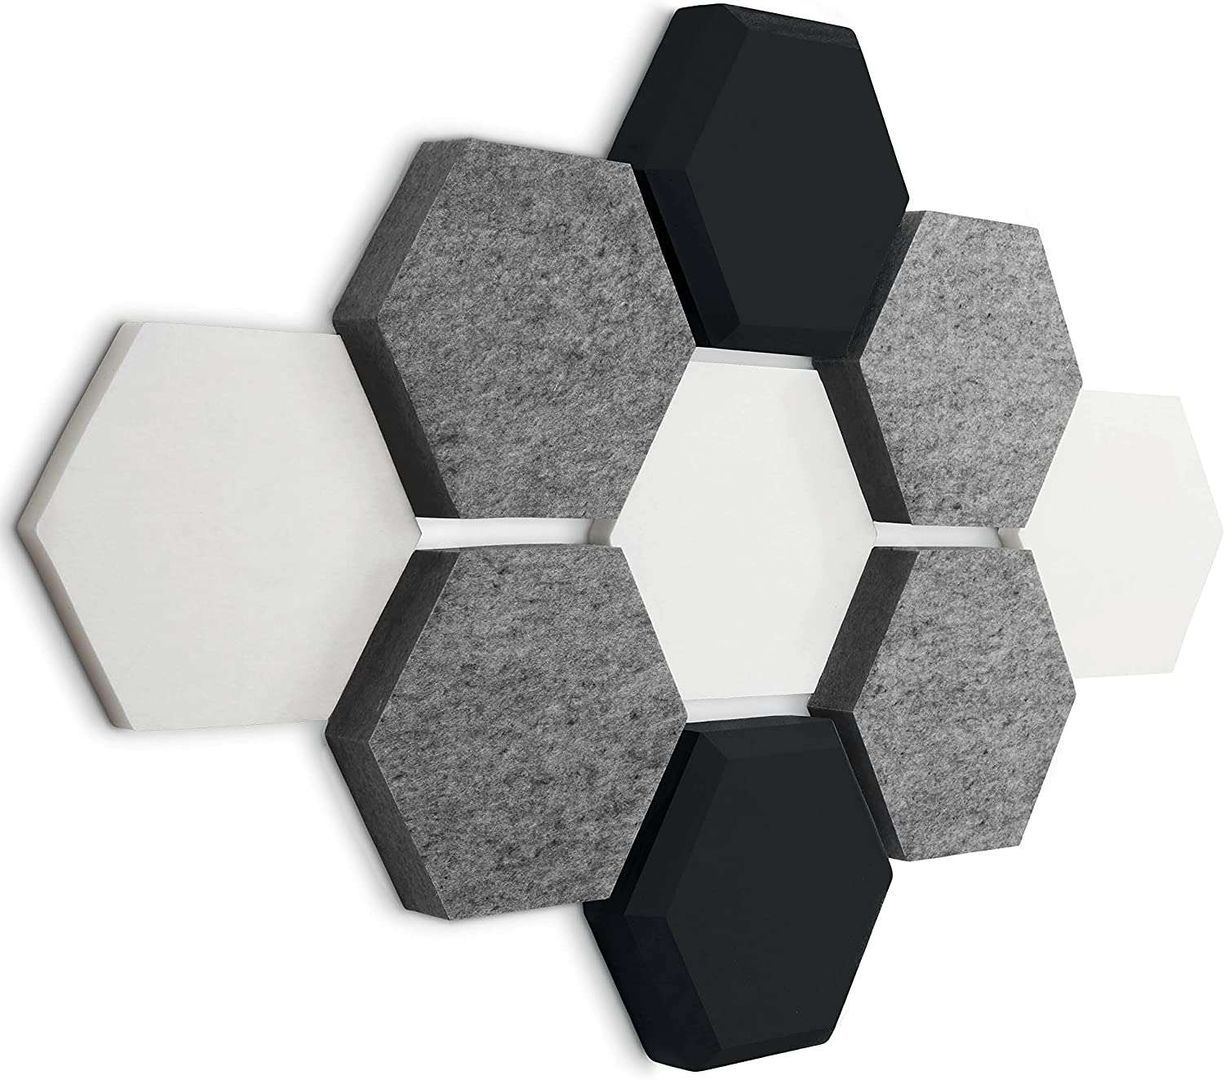 Sound Absorber Wall, Press profile homify Press profile homify Storage room